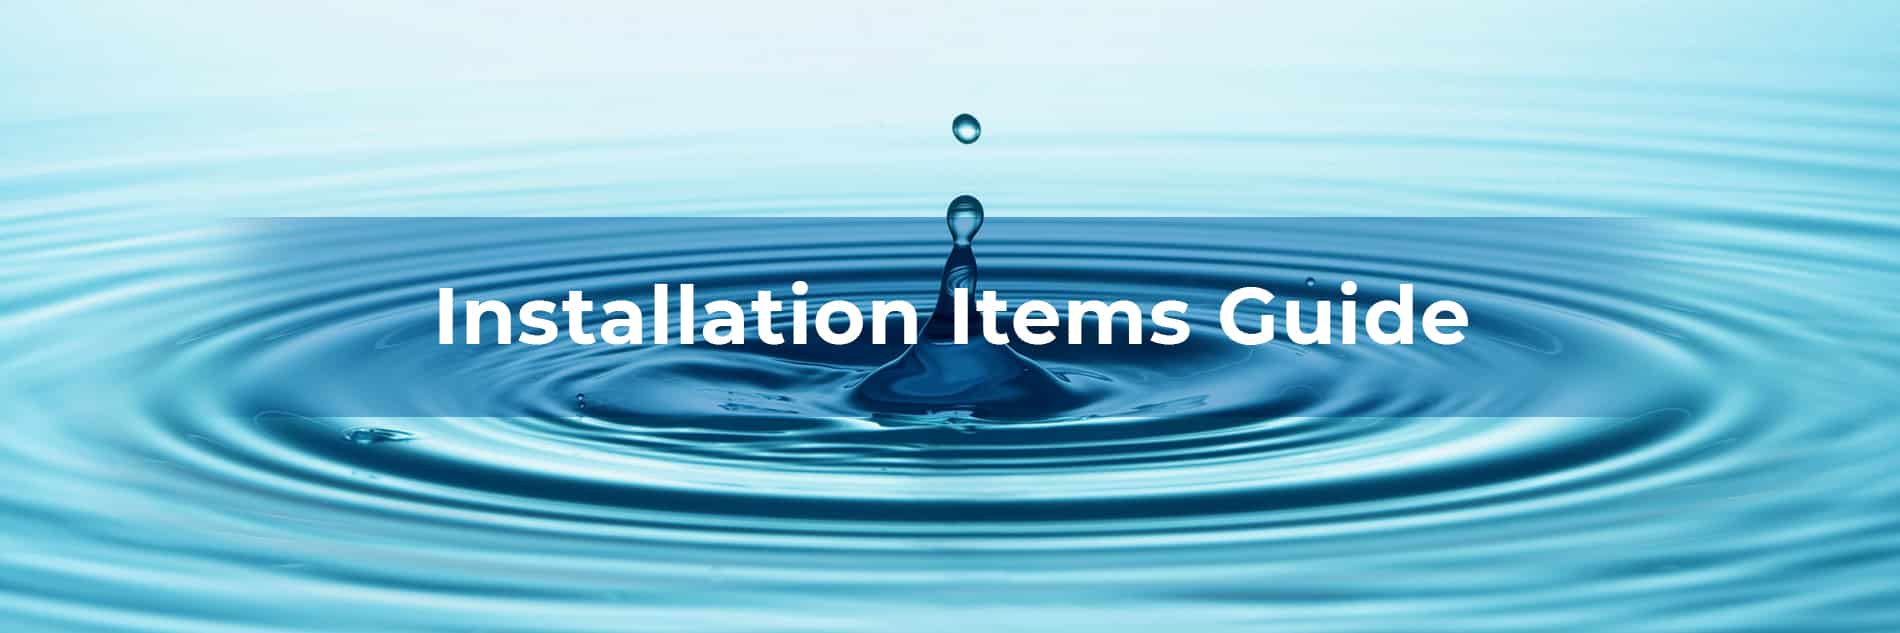 Installation Item Guide | Drainage Specialist near me